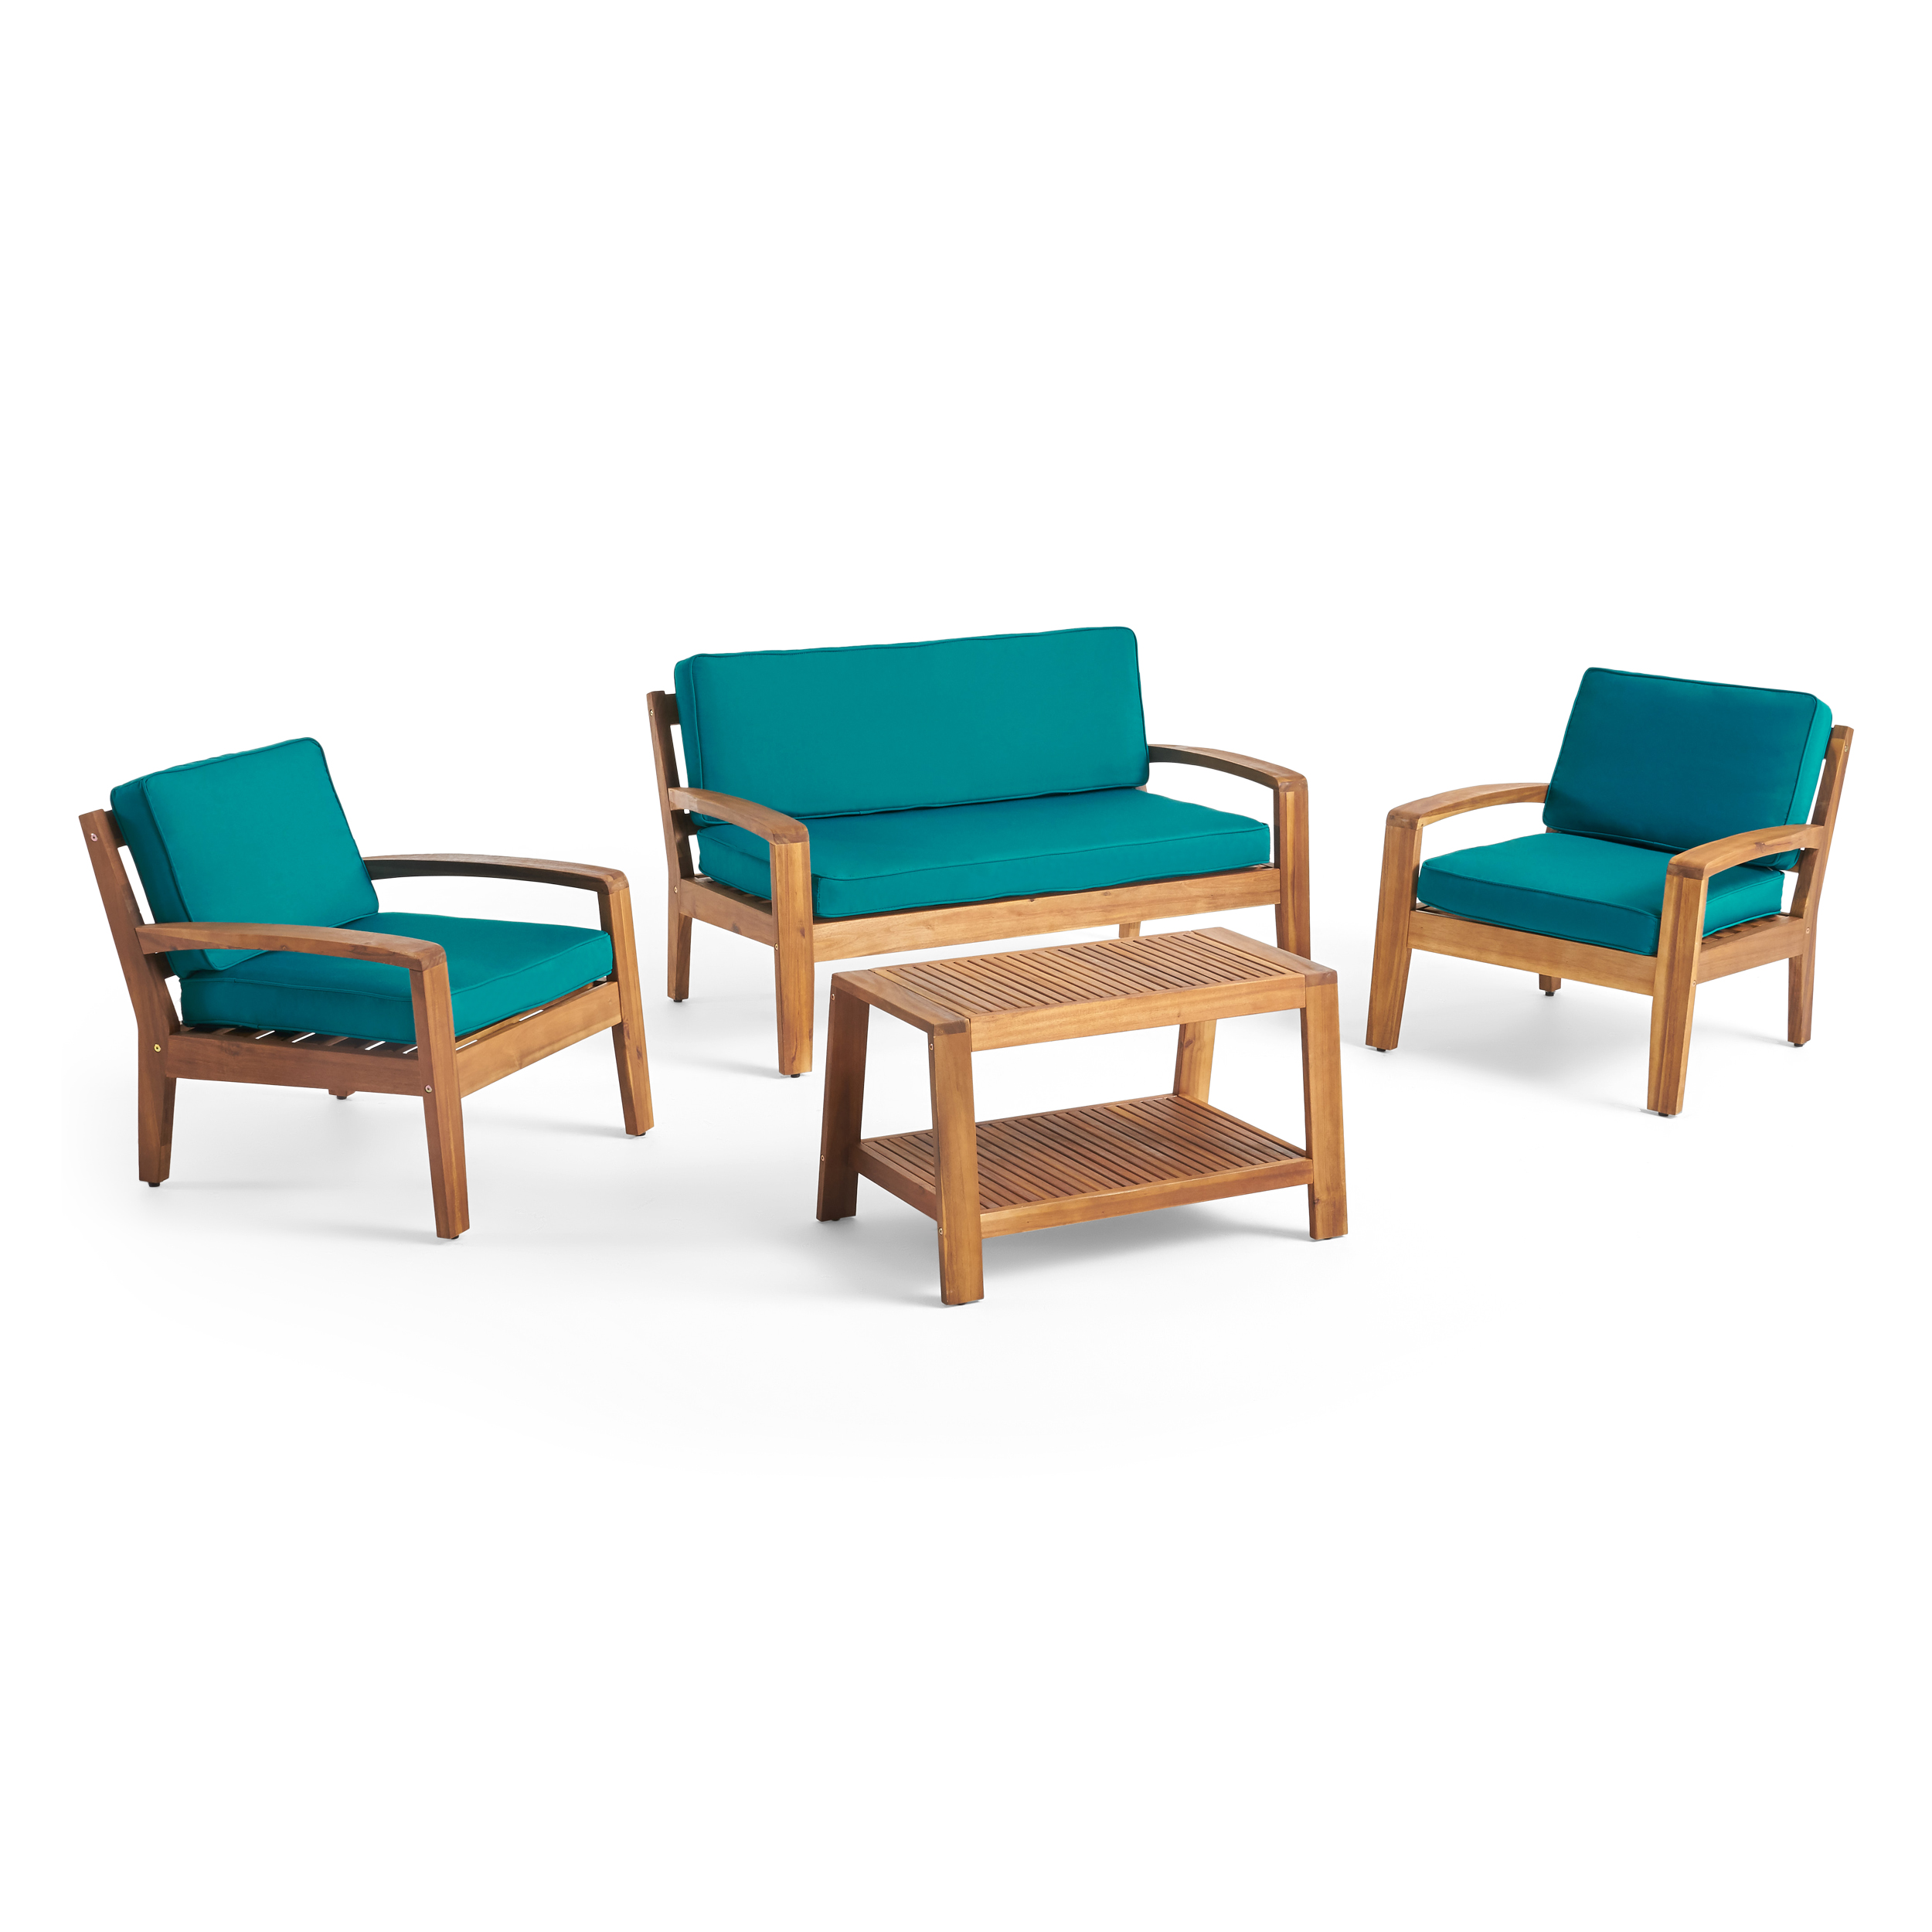 Wilcox Outdoor 4-Seater Acacia Wood Conversation Set with Coffee Table and Cushions, Teak, Sunbrella Canvas Teal - image 1 of 8